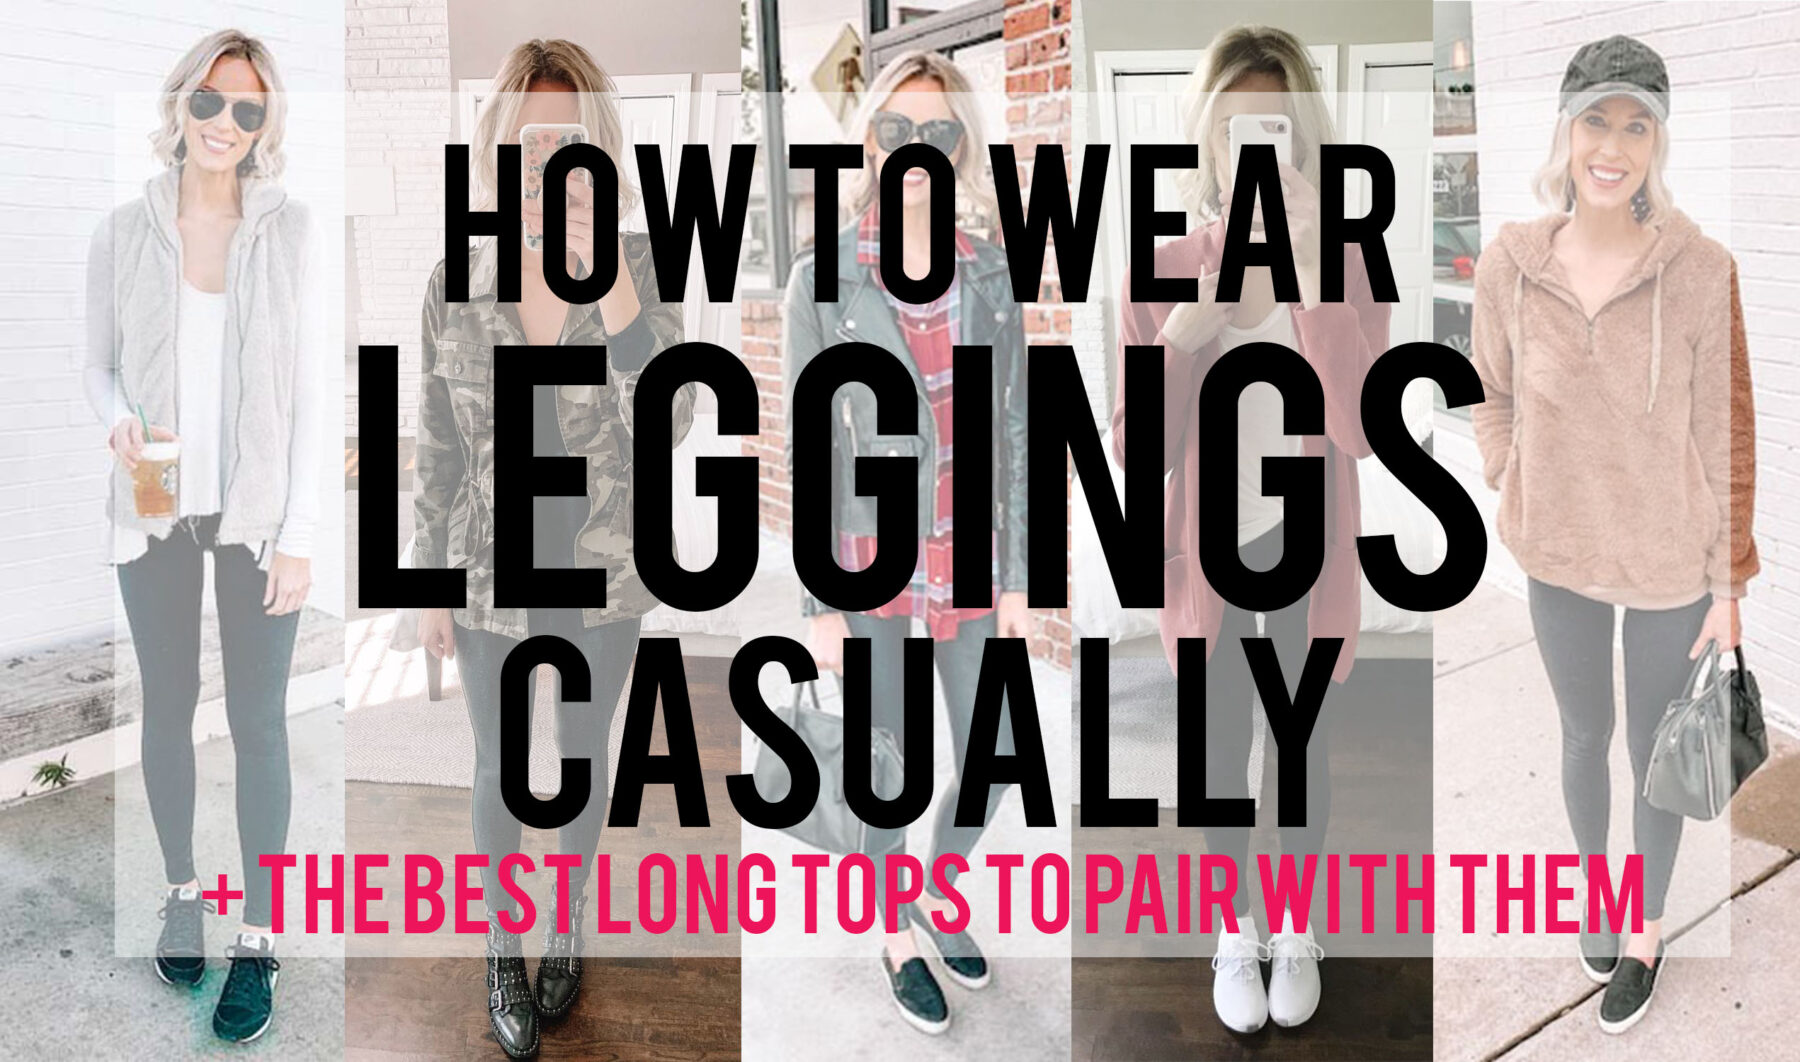 how to put together winter outfits with leggings